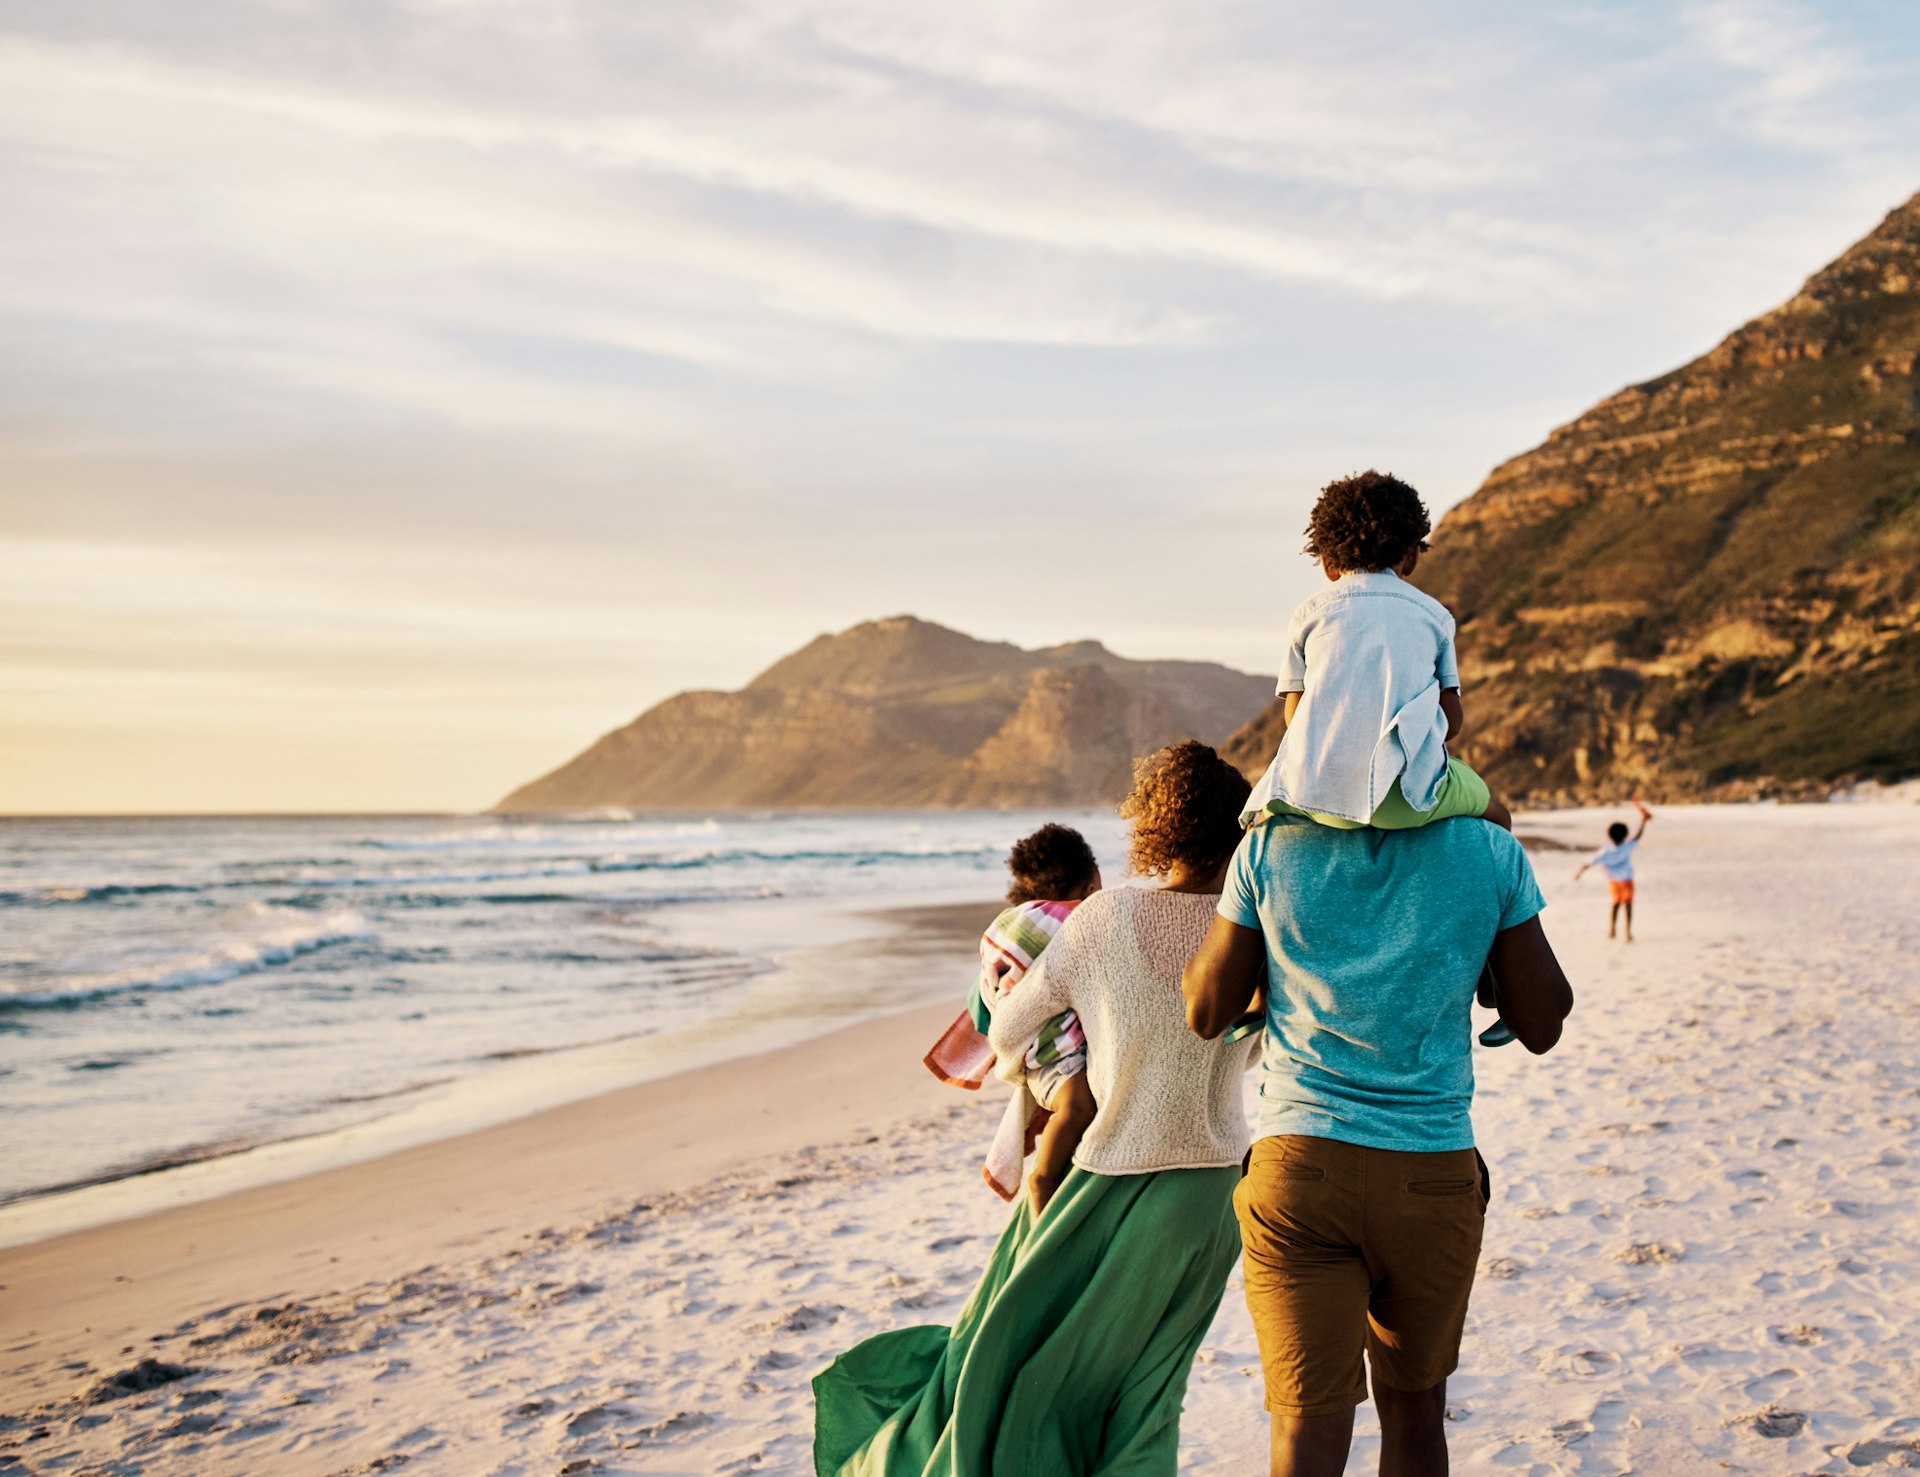 A family walking on a beach in South Africa